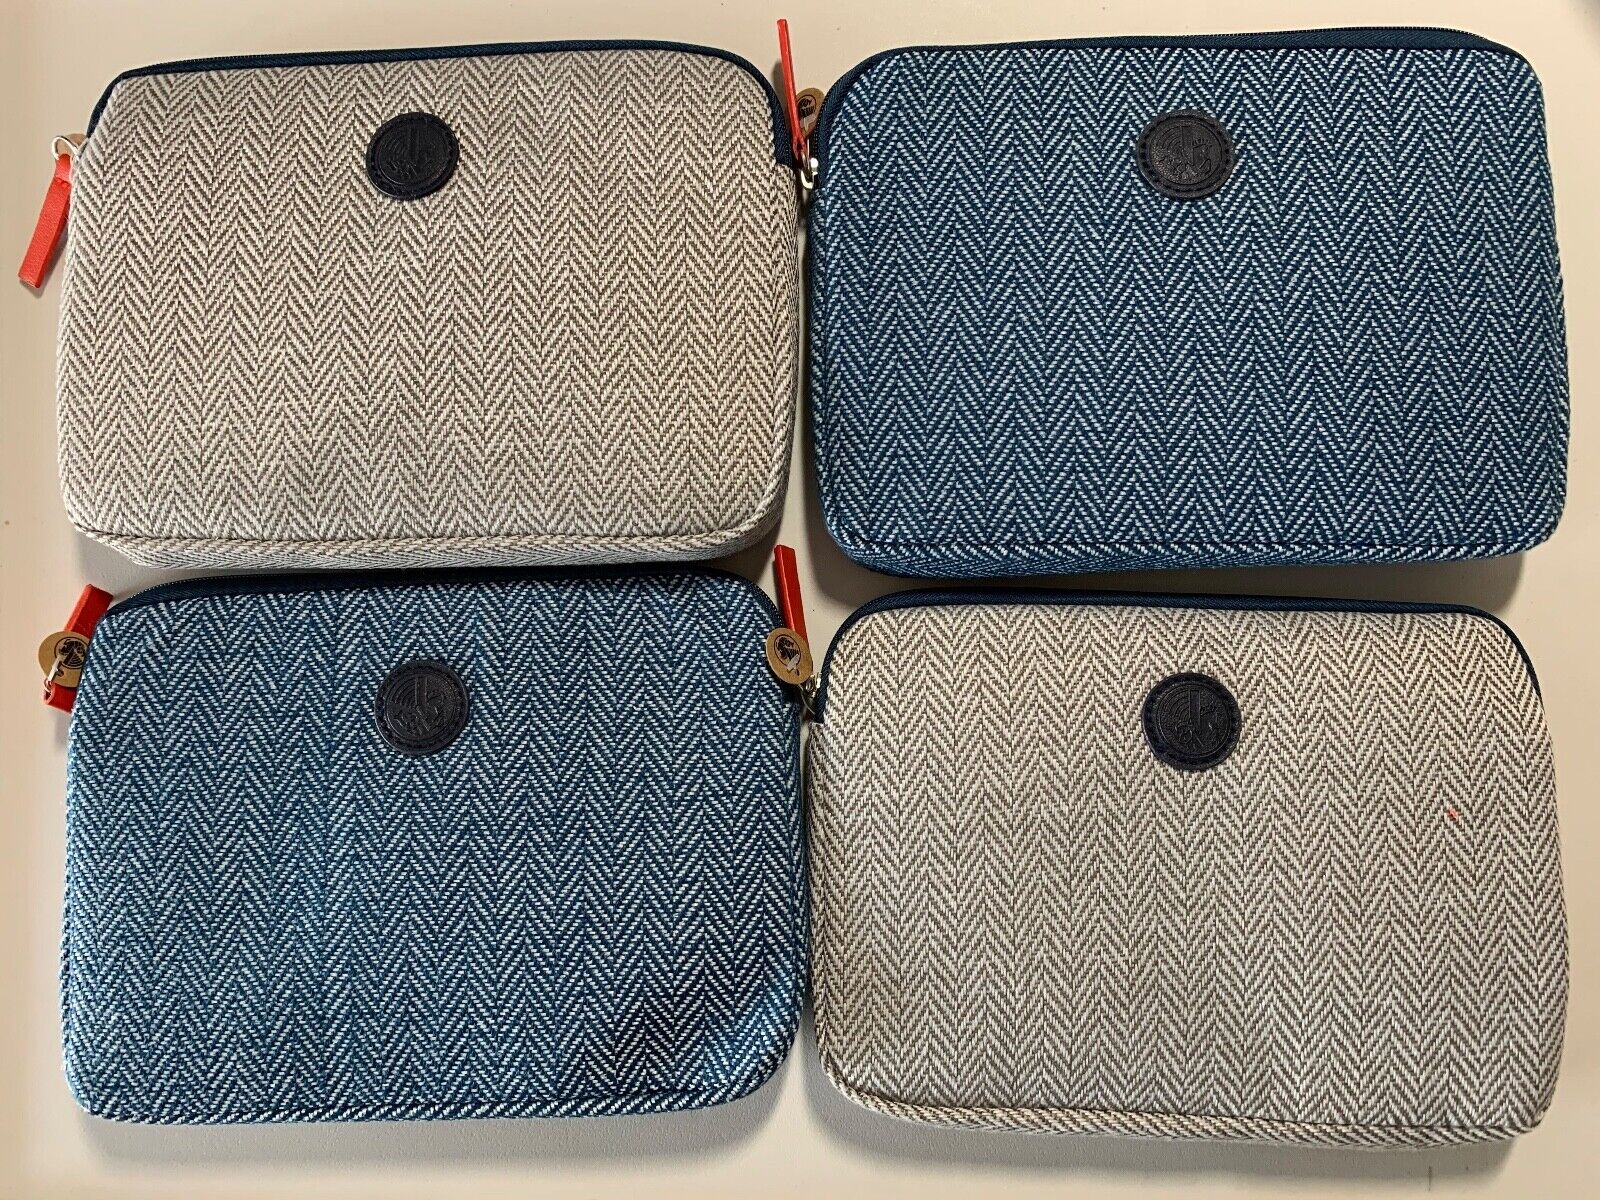 AIR FRANCE Business Class Amenity Kits - Blue and Grey - NEW FACTORY SEALED